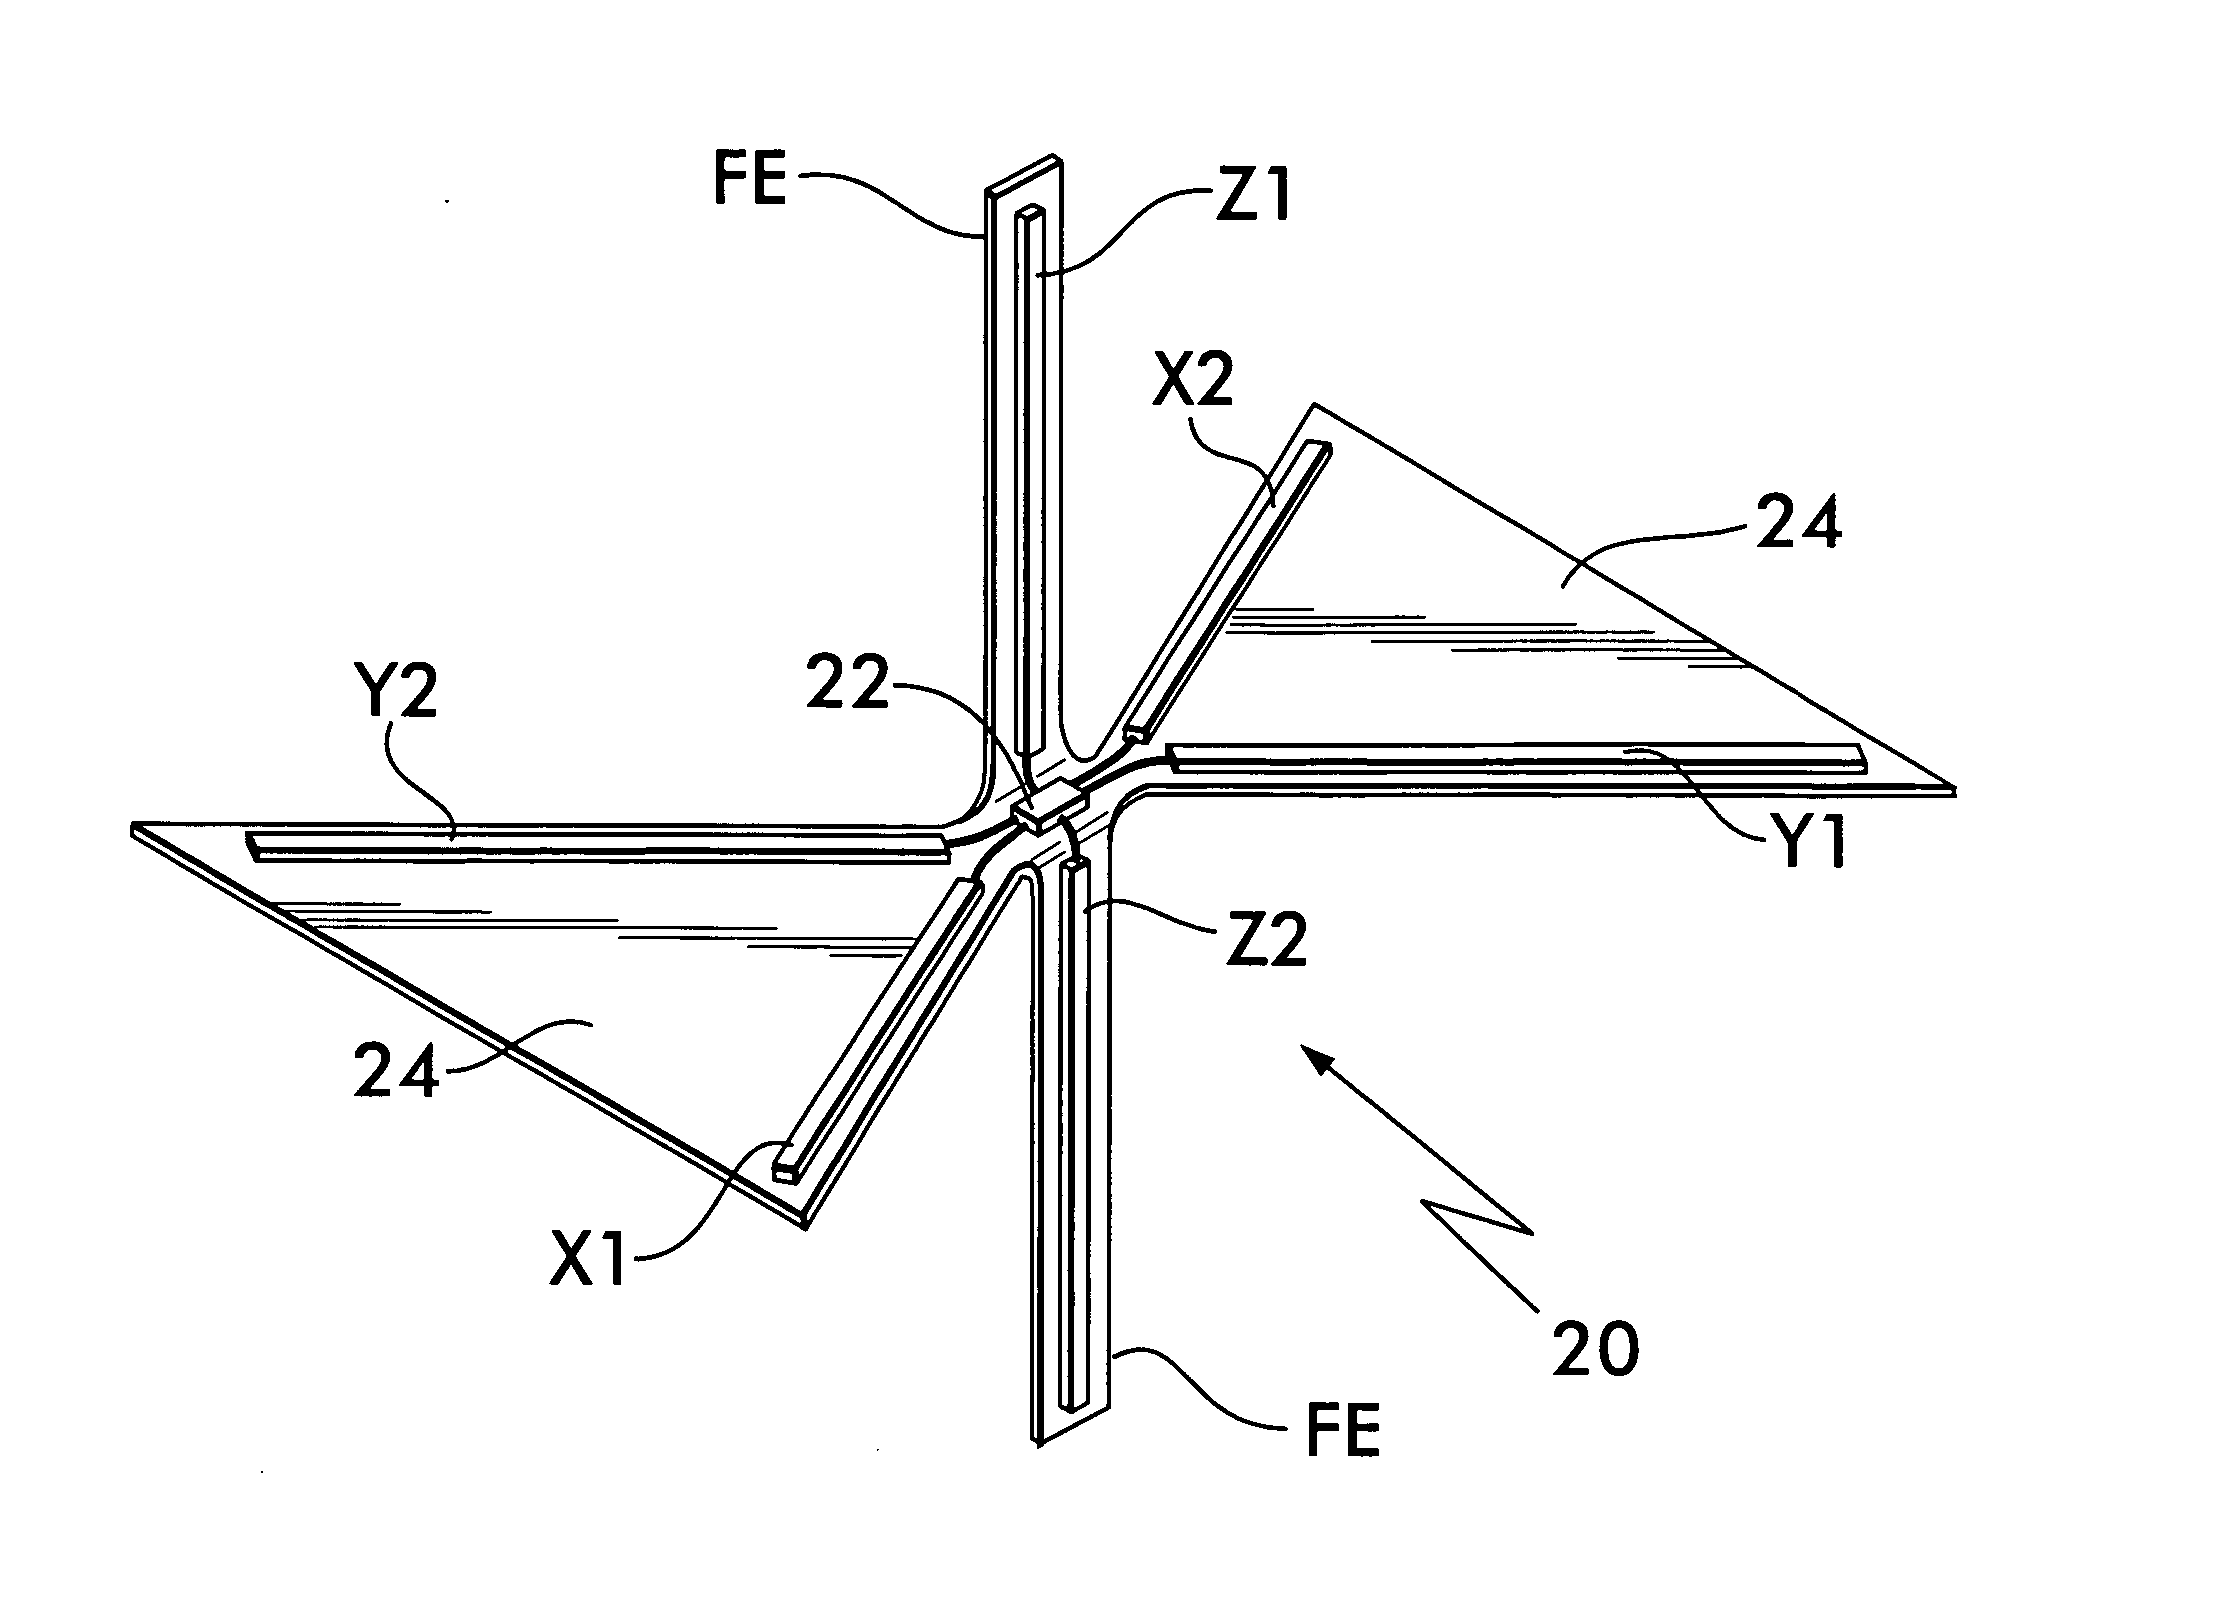 Security tag with three dimensional antenna array made from flat stock